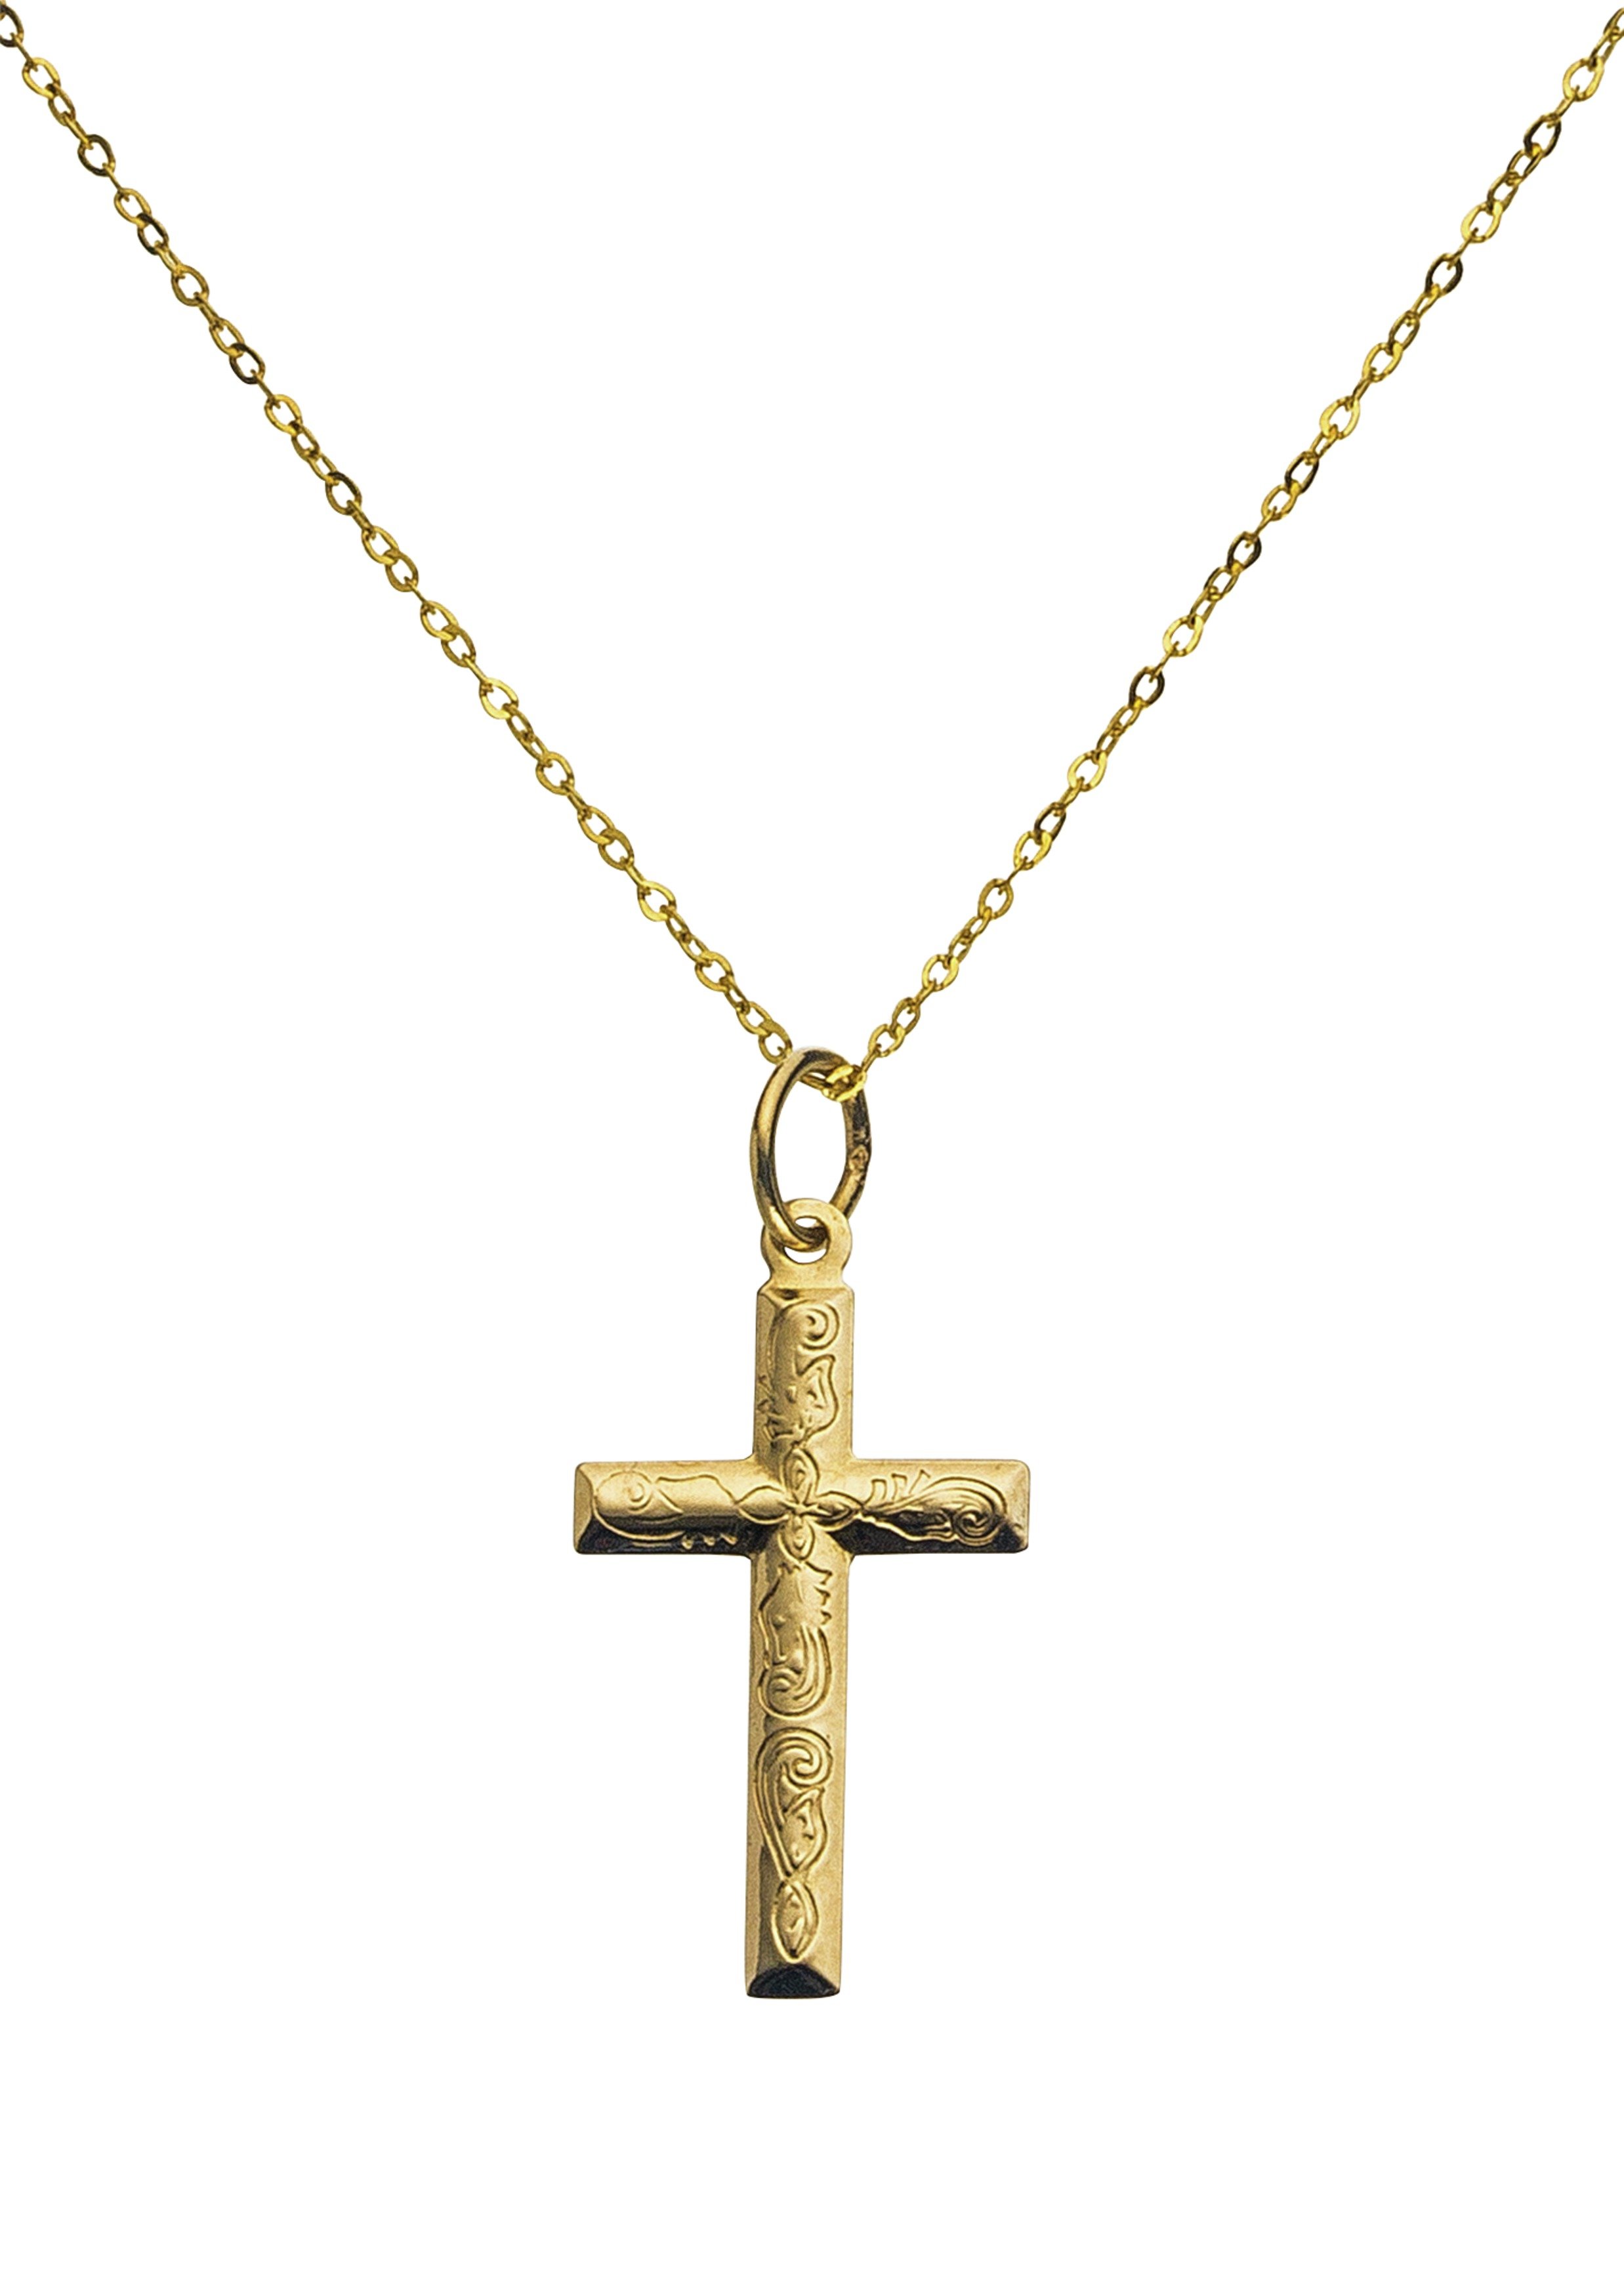 Revere 9ct Gold Patterned Cross Pendant 16 Inch Necklace